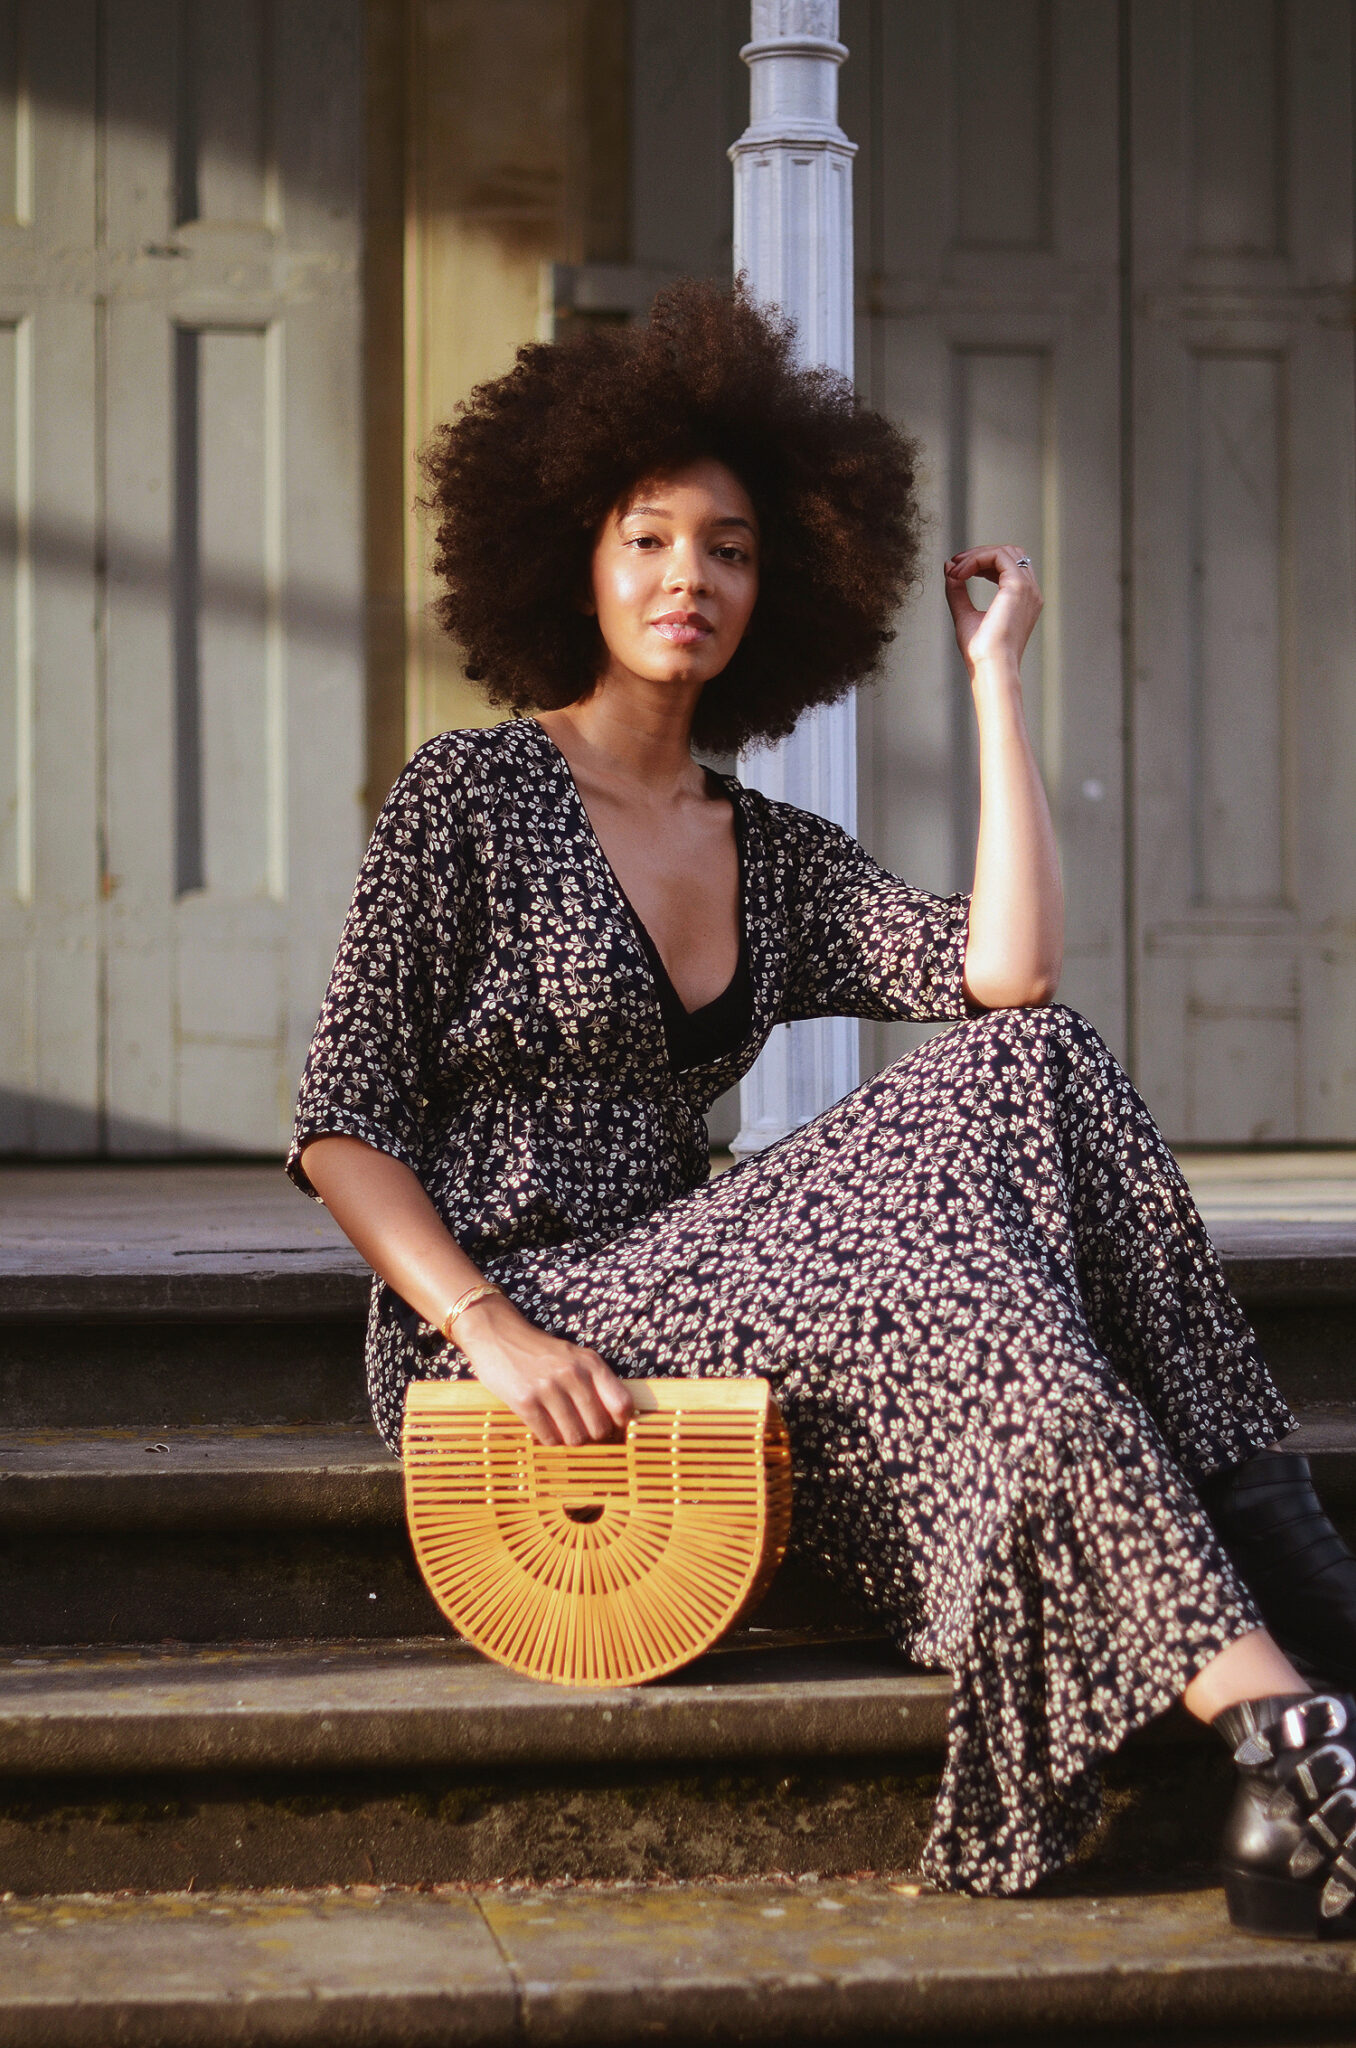 mercredie-blog-mode-geneve-blogueuse-bloggeuse-suisse-swiss-switzerland-robe-ganni-dress-cult-gaia-bag-small-toga-pulla-boots-buckled-afro-hair-nappy-curly-curls-big-fro-cheveux-frises3